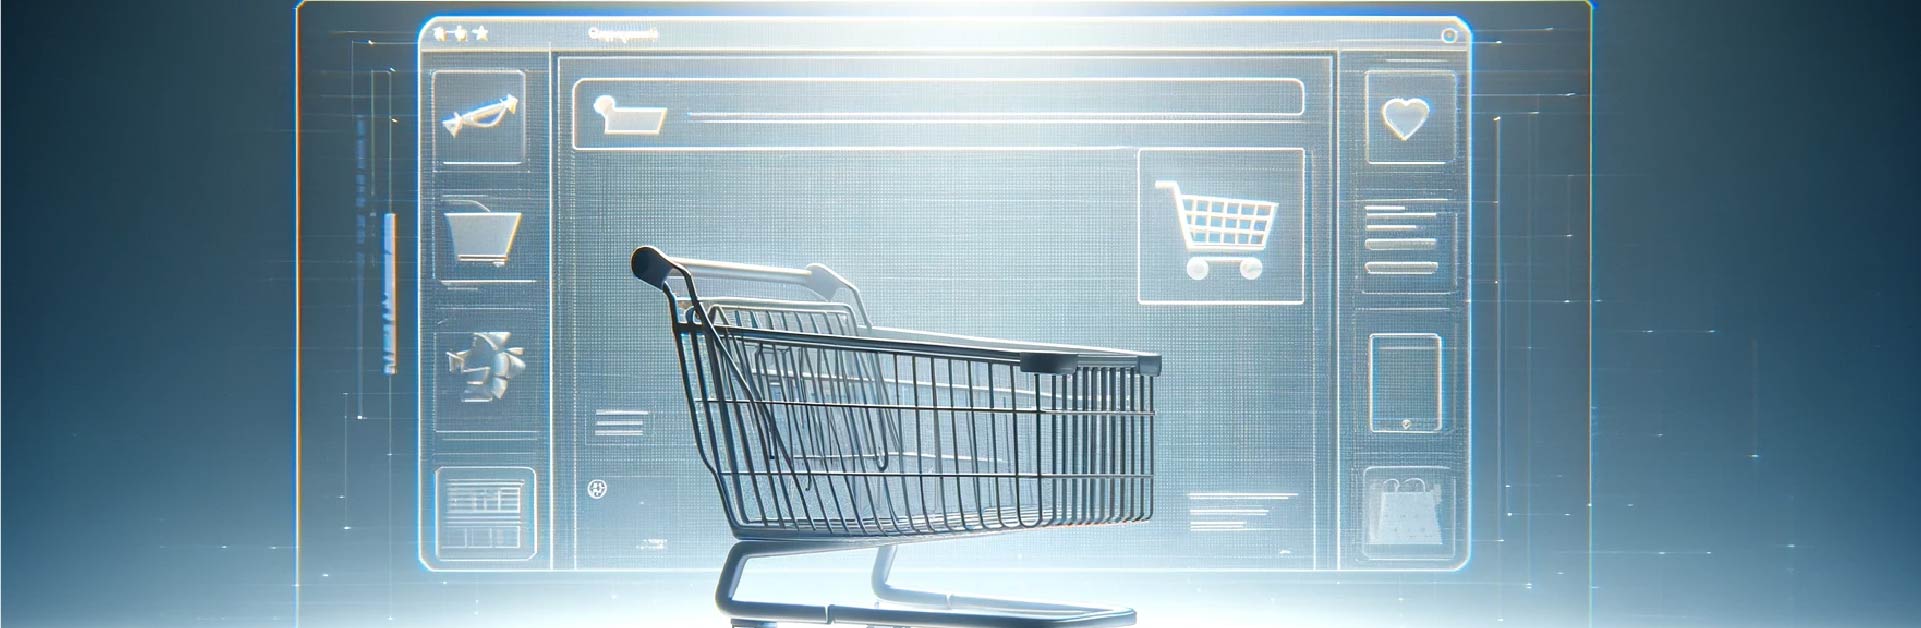 Shopping Cart Abandonment: Reasons and Actionable Solutions